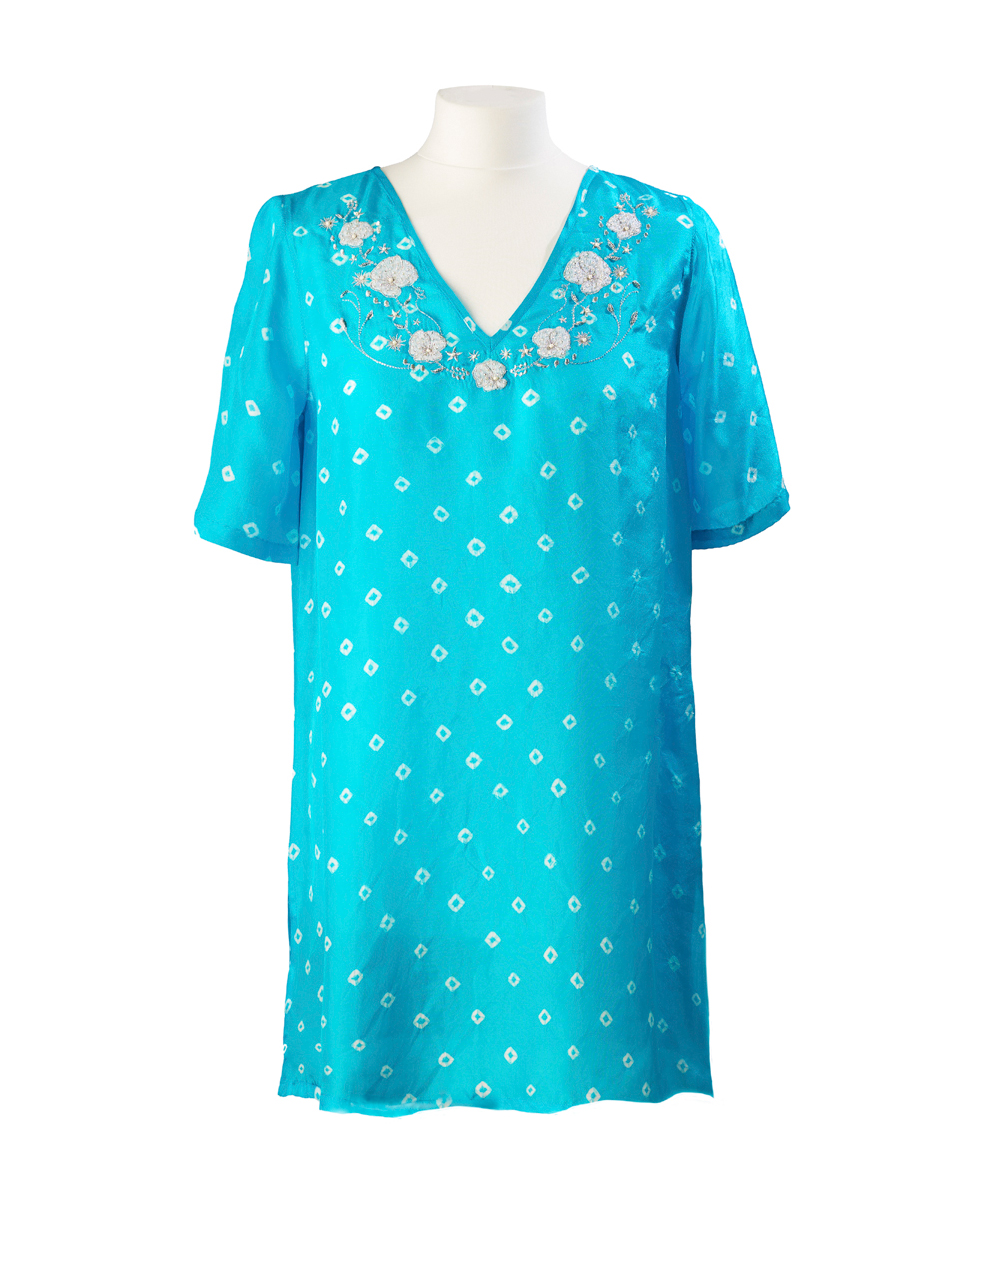 Turquoise Poppy Embroidered Silk Tunic Dress Short